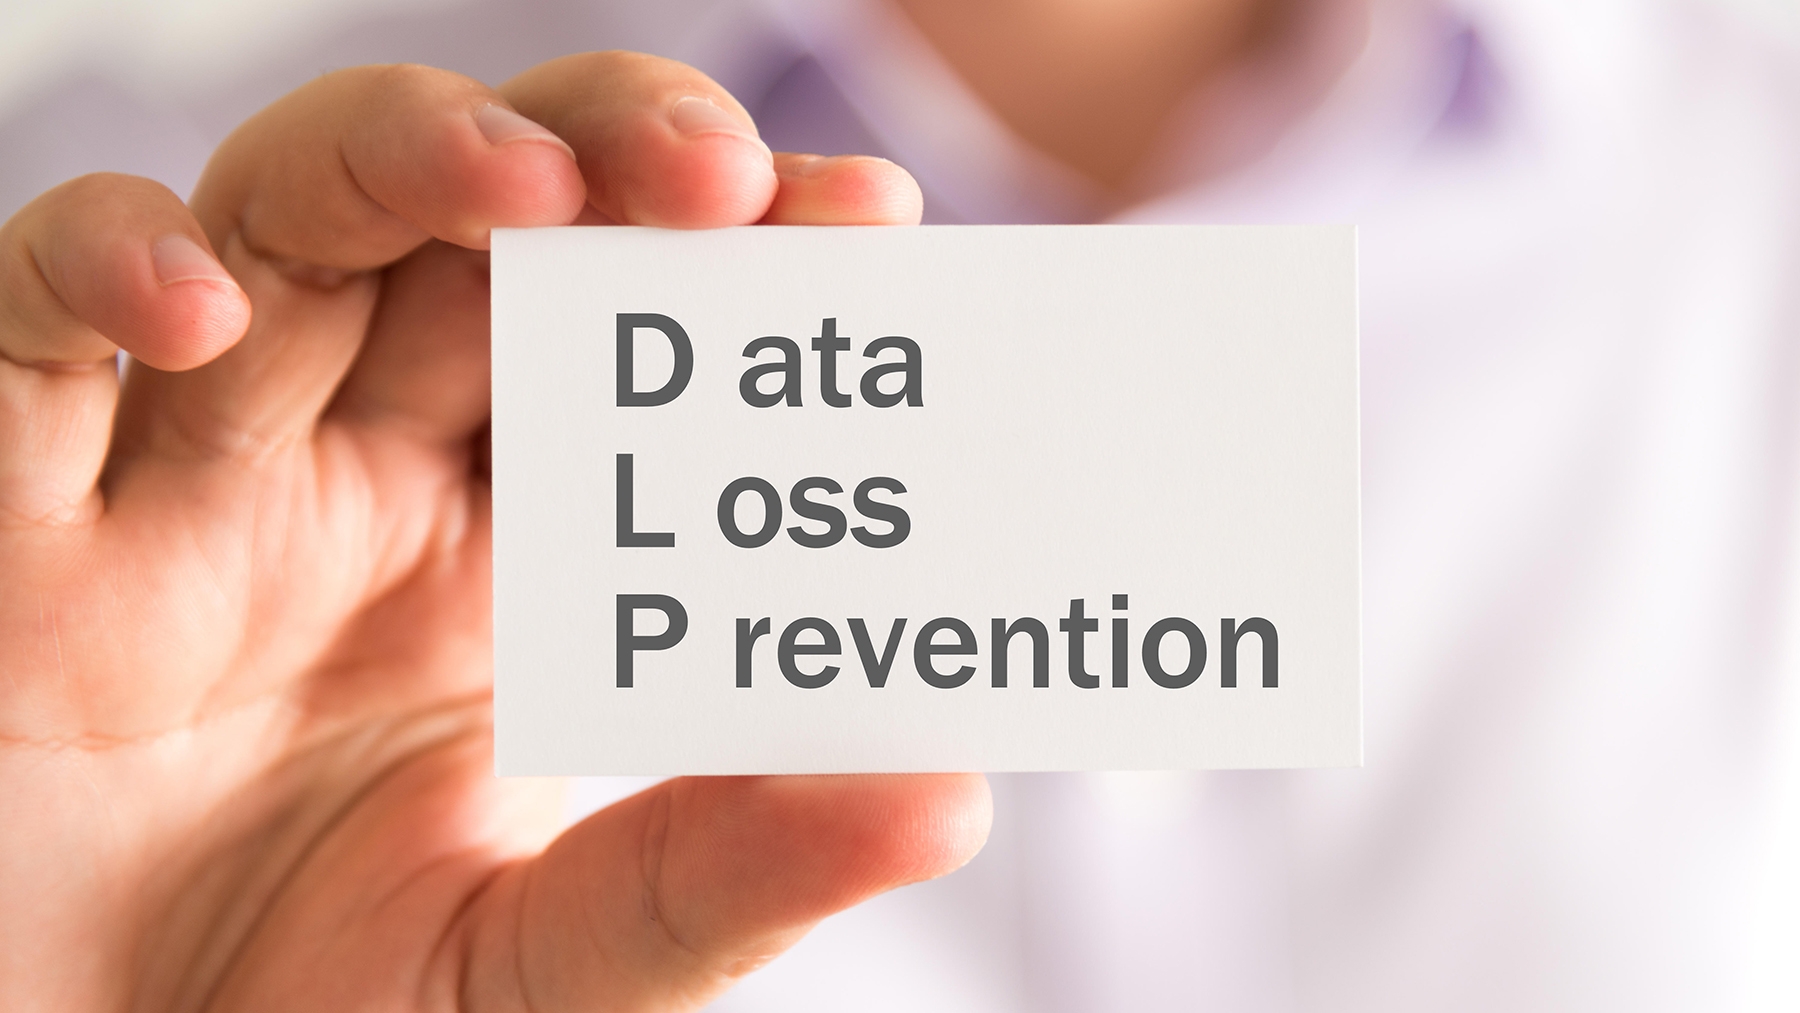 From Dark Reading – InfoSec 101: Why Data Loss Prevention is Important to Enterprise Defense